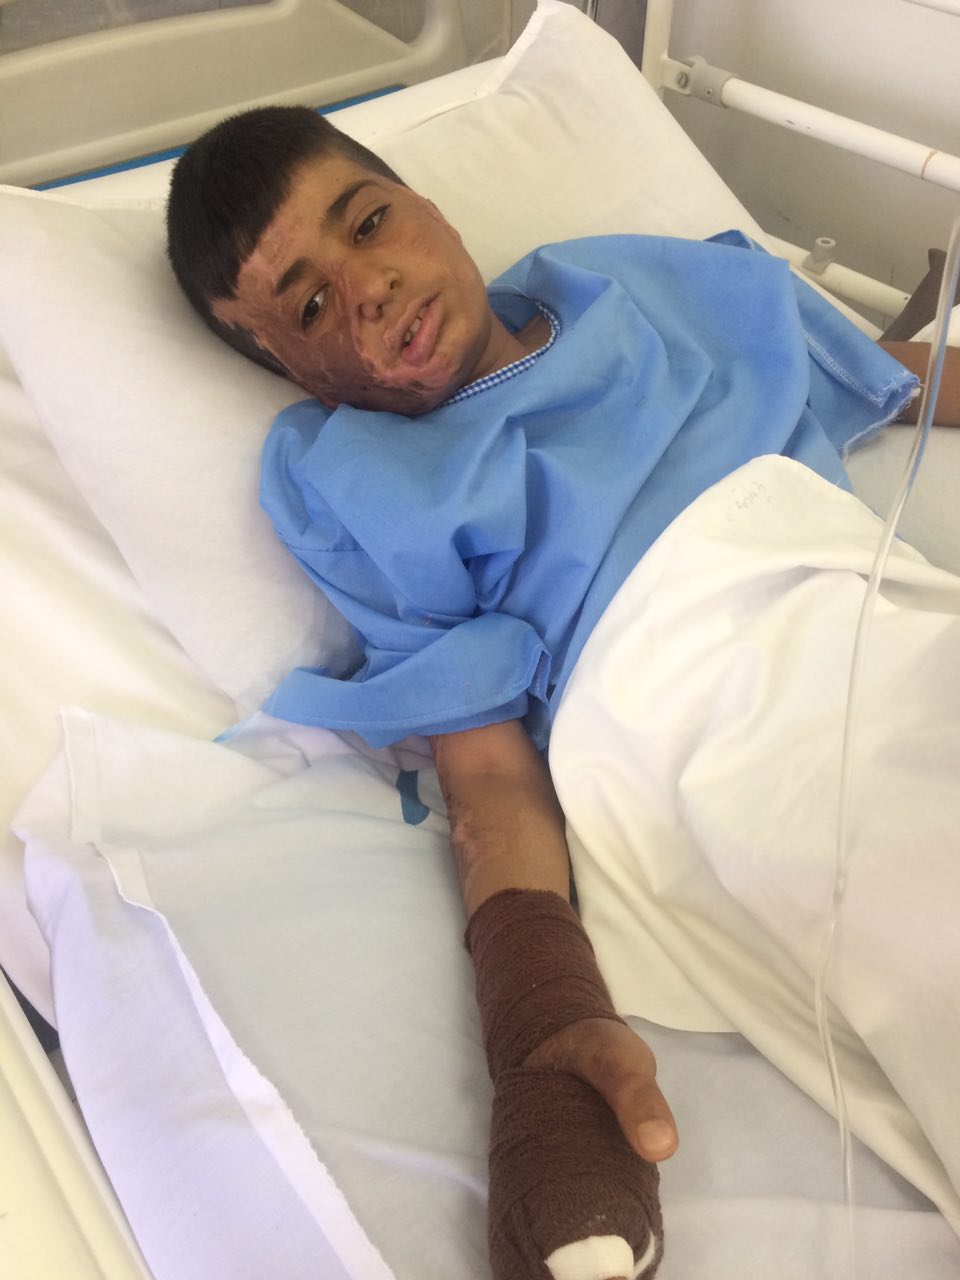 Do not let it keep silent! Mohammad had a successful surgery by help of Mehrafarin members.